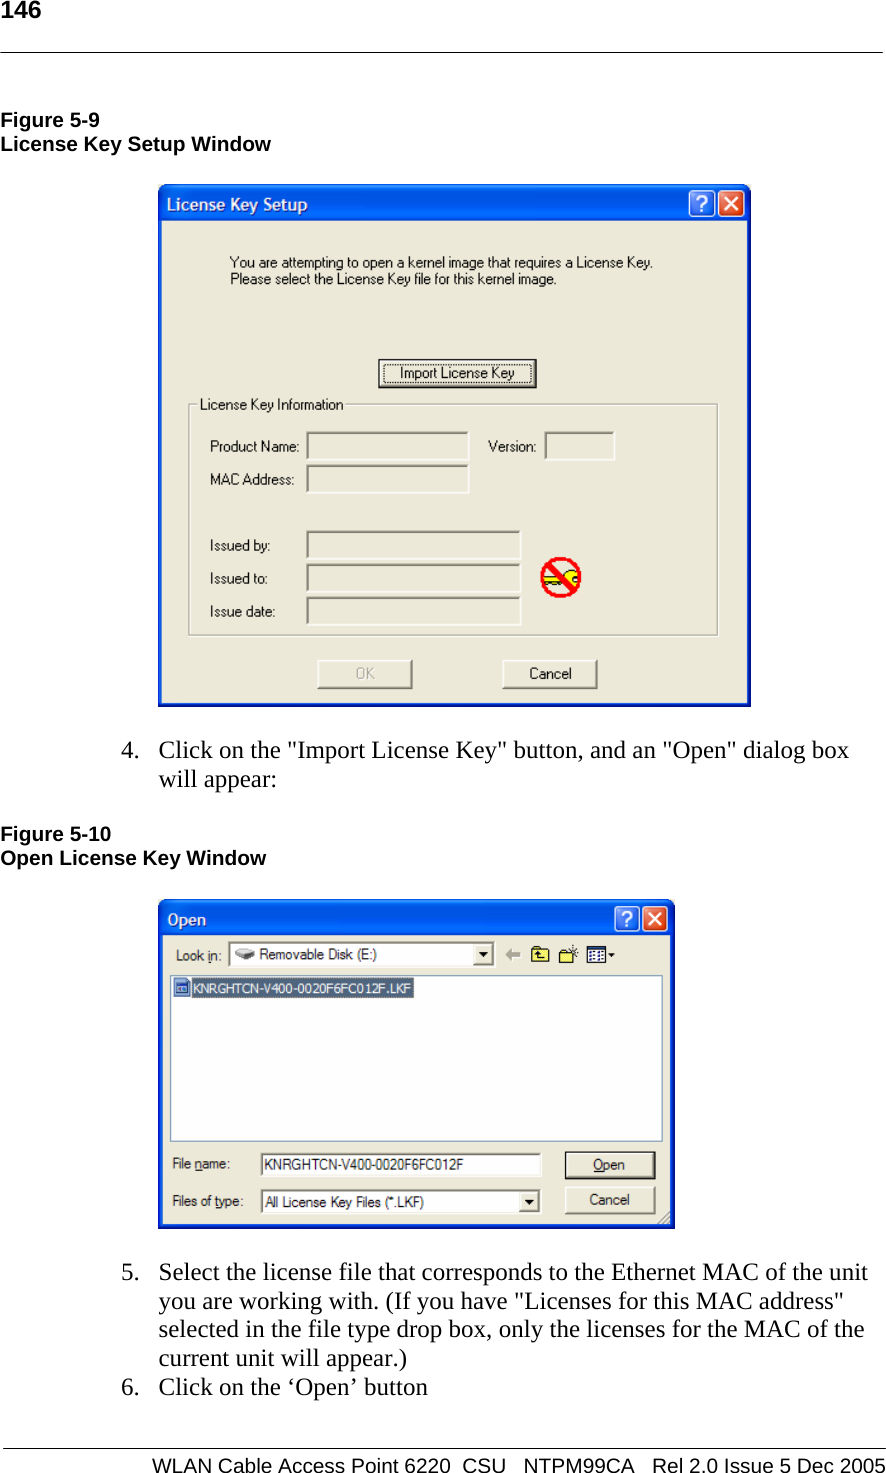   146    WLAN Cable Access Point 6220  CSU   NTPM99CA   Rel 2.0 Issue 5 Dec 2005 Figure 5-9 License Key Setup Window   4. Click on the &quot;Import License Key&quot; button, and an &quot;Open&quot; dialog box will appear: Figure 5-10 Open License Key Window  5. Select the license file that corresponds to the Ethernet MAC of the unit you are working with. (If you have &quot;Licenses for this MAC address&quot; selected in the file type drop box, only the licenses for the MAC of the current unit will appear.) 6. Click on the ‘Open’ button 